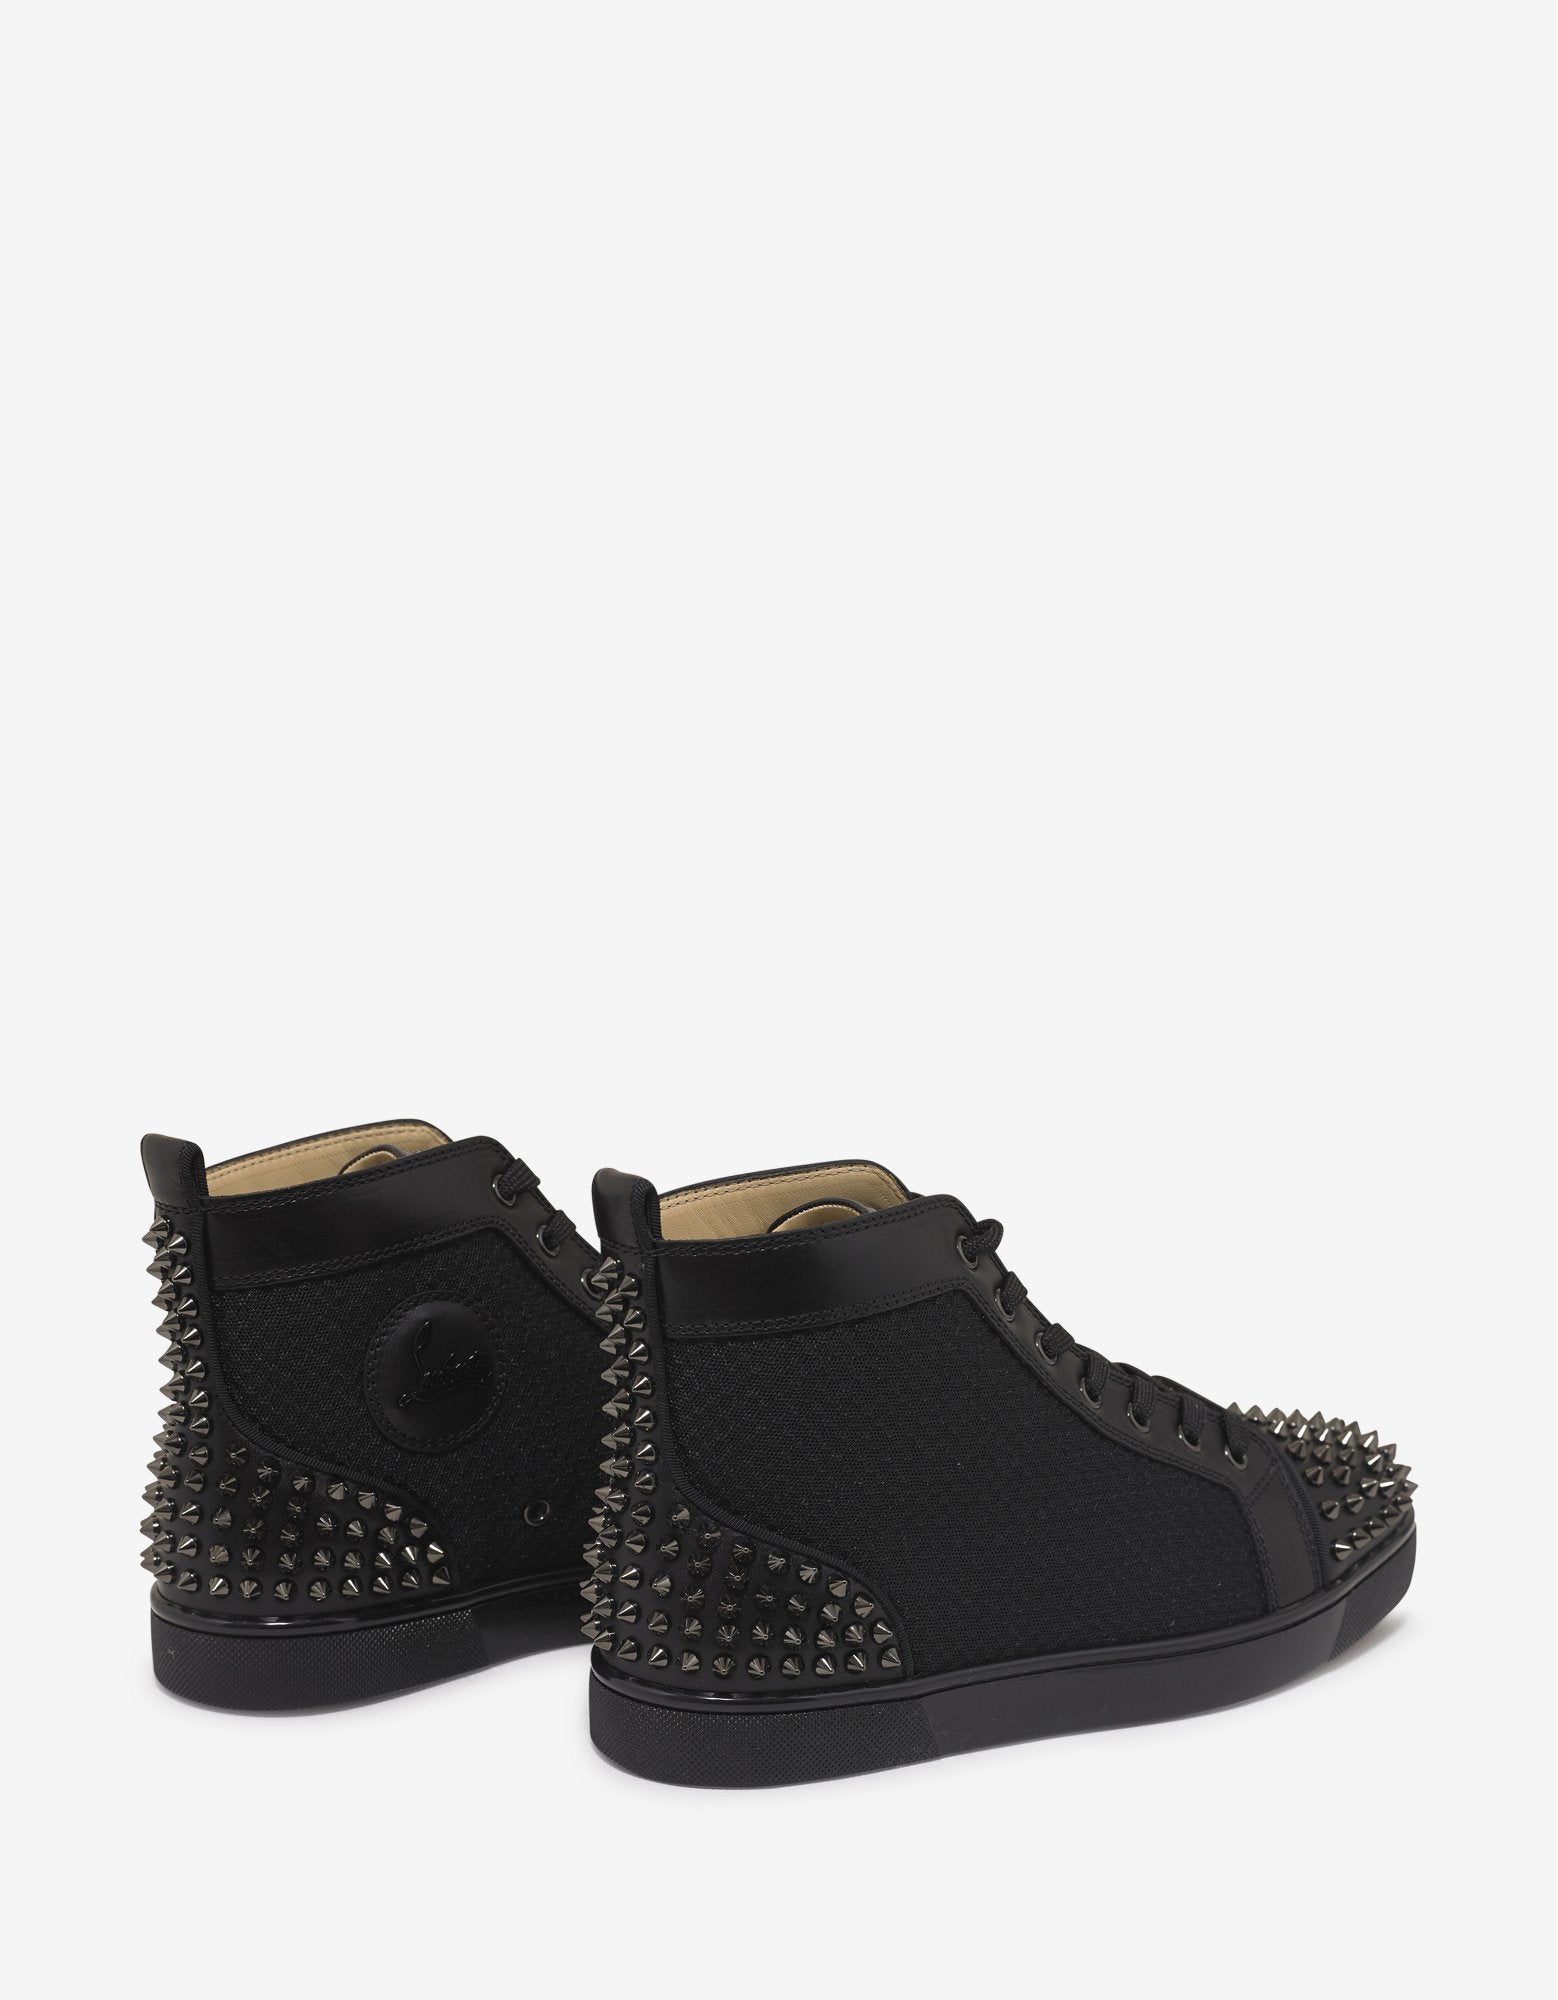 AC Lou Spikes 2 Flat Spikes High Top Trainers 